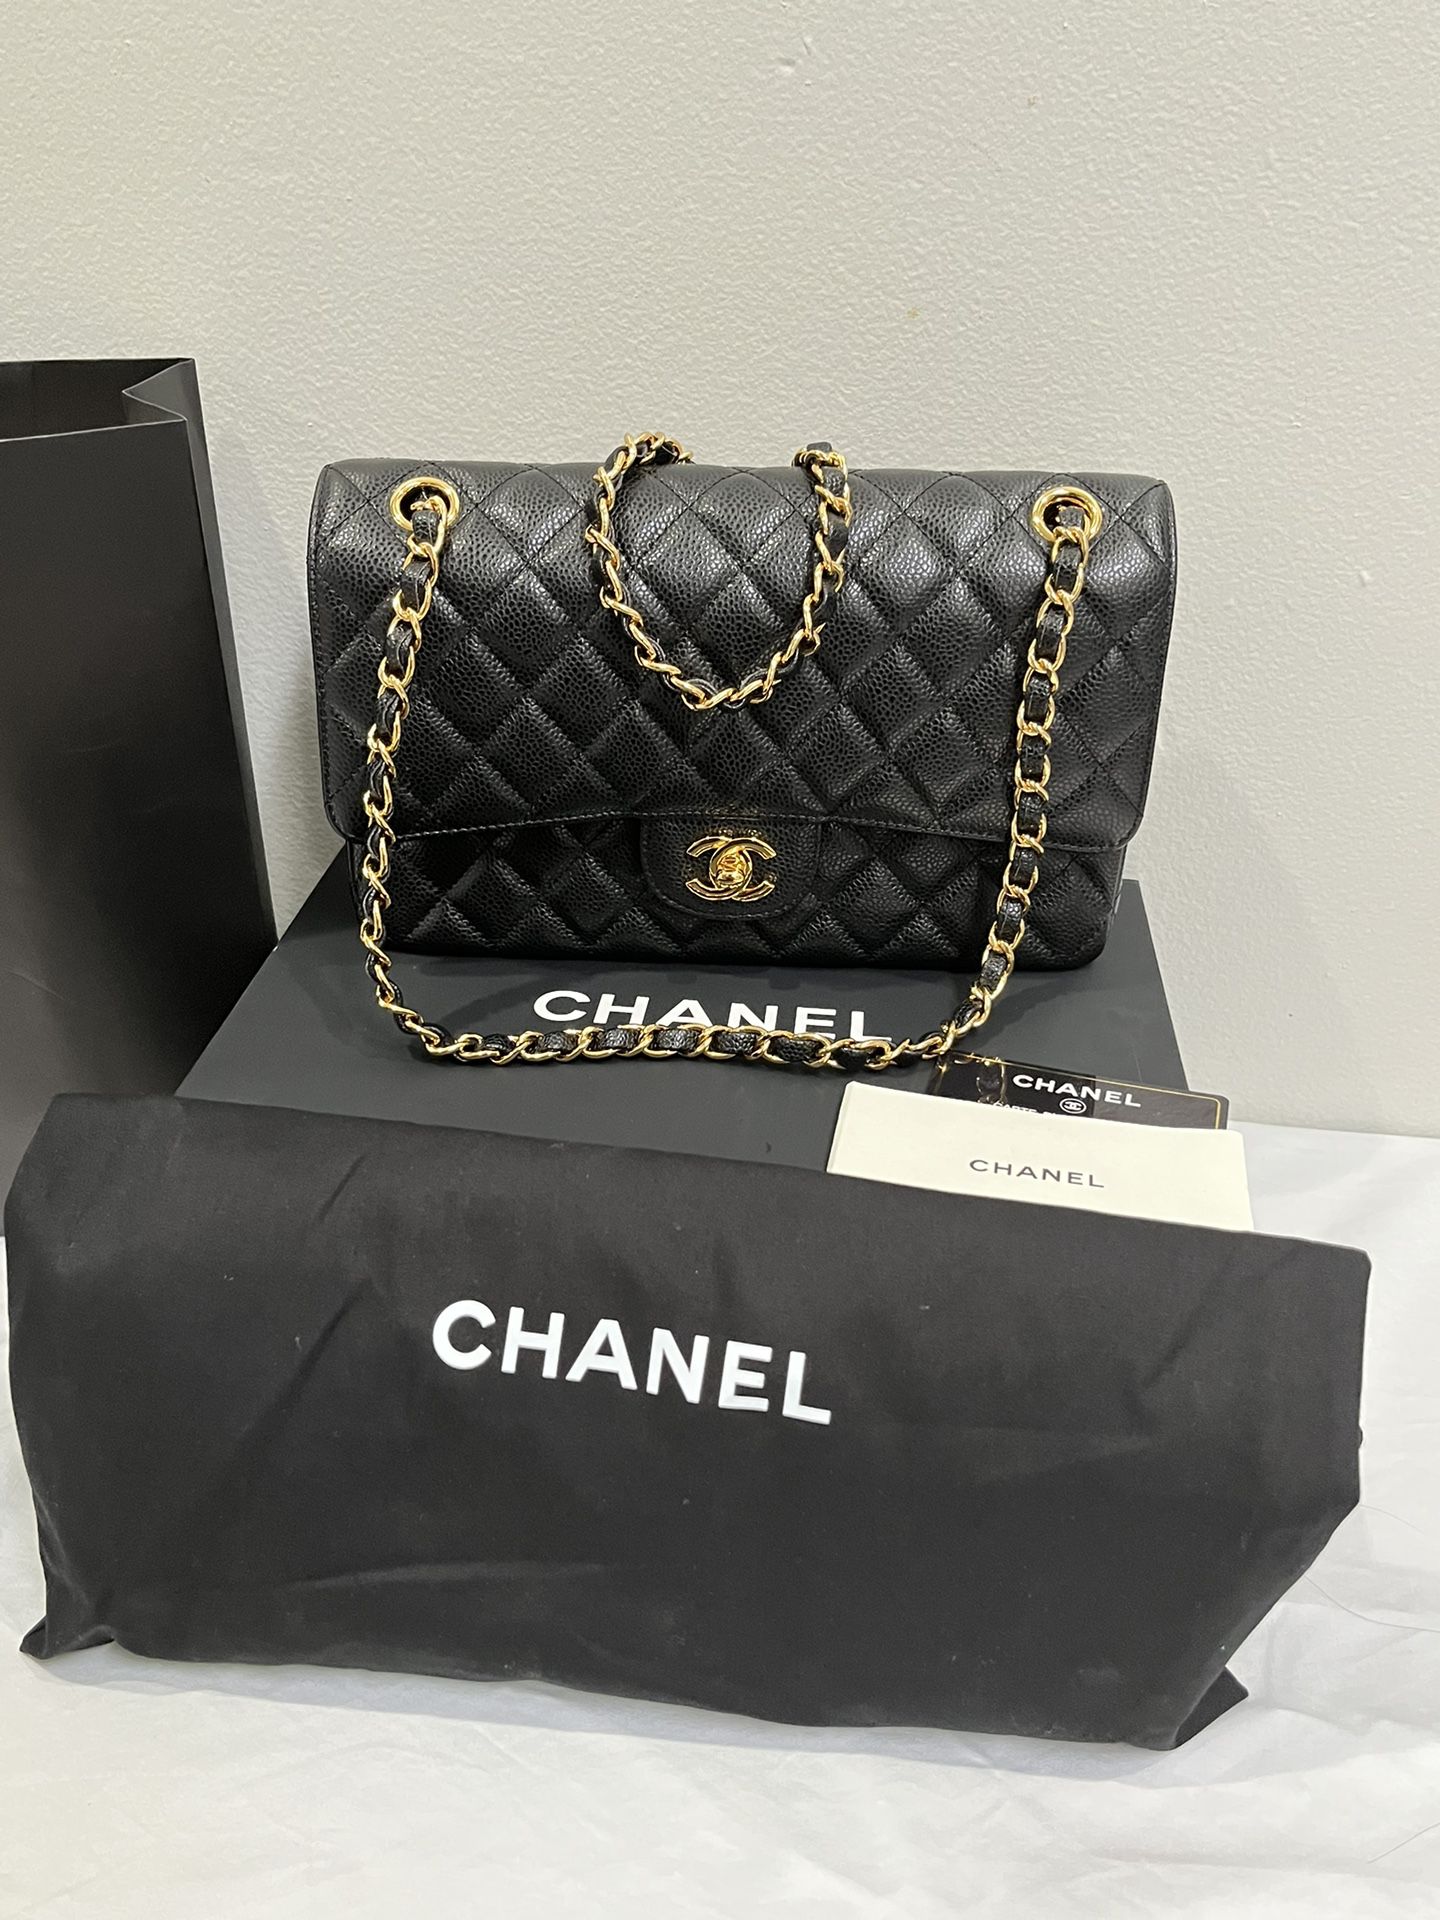 LV Bag for Sale in Valley Stream, NY - OfferUp